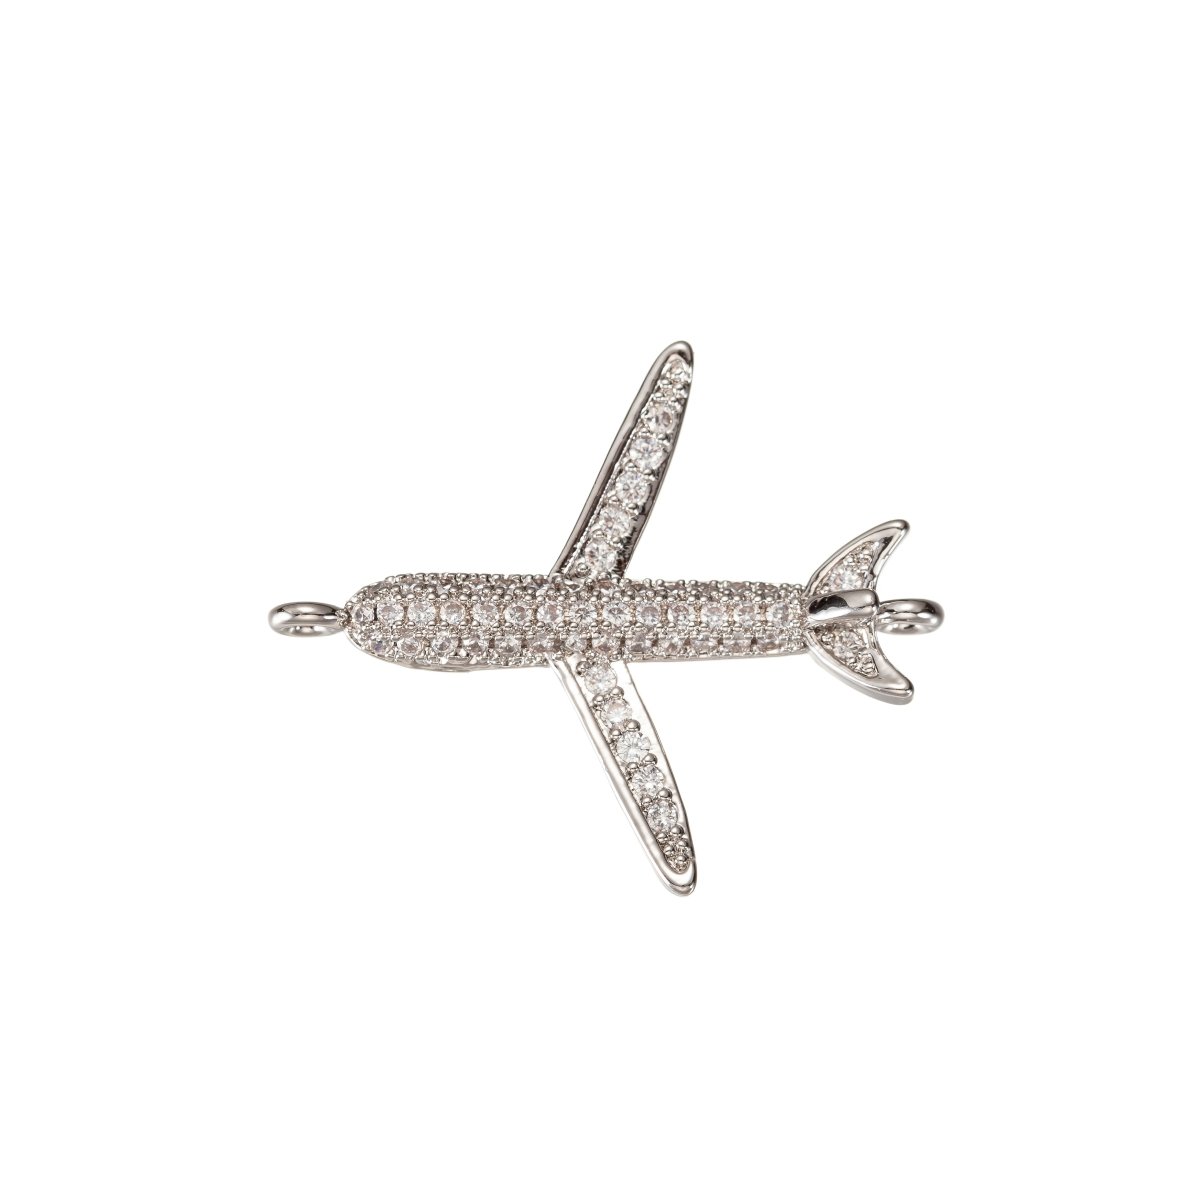 Airplane Connector CZ Micro Pave, Airplane Bracelet CONNECTOR, Traveler Jewelry, Pilot Jewelry, Airplane Charm Connector F-307 F-308 - DLUXCA